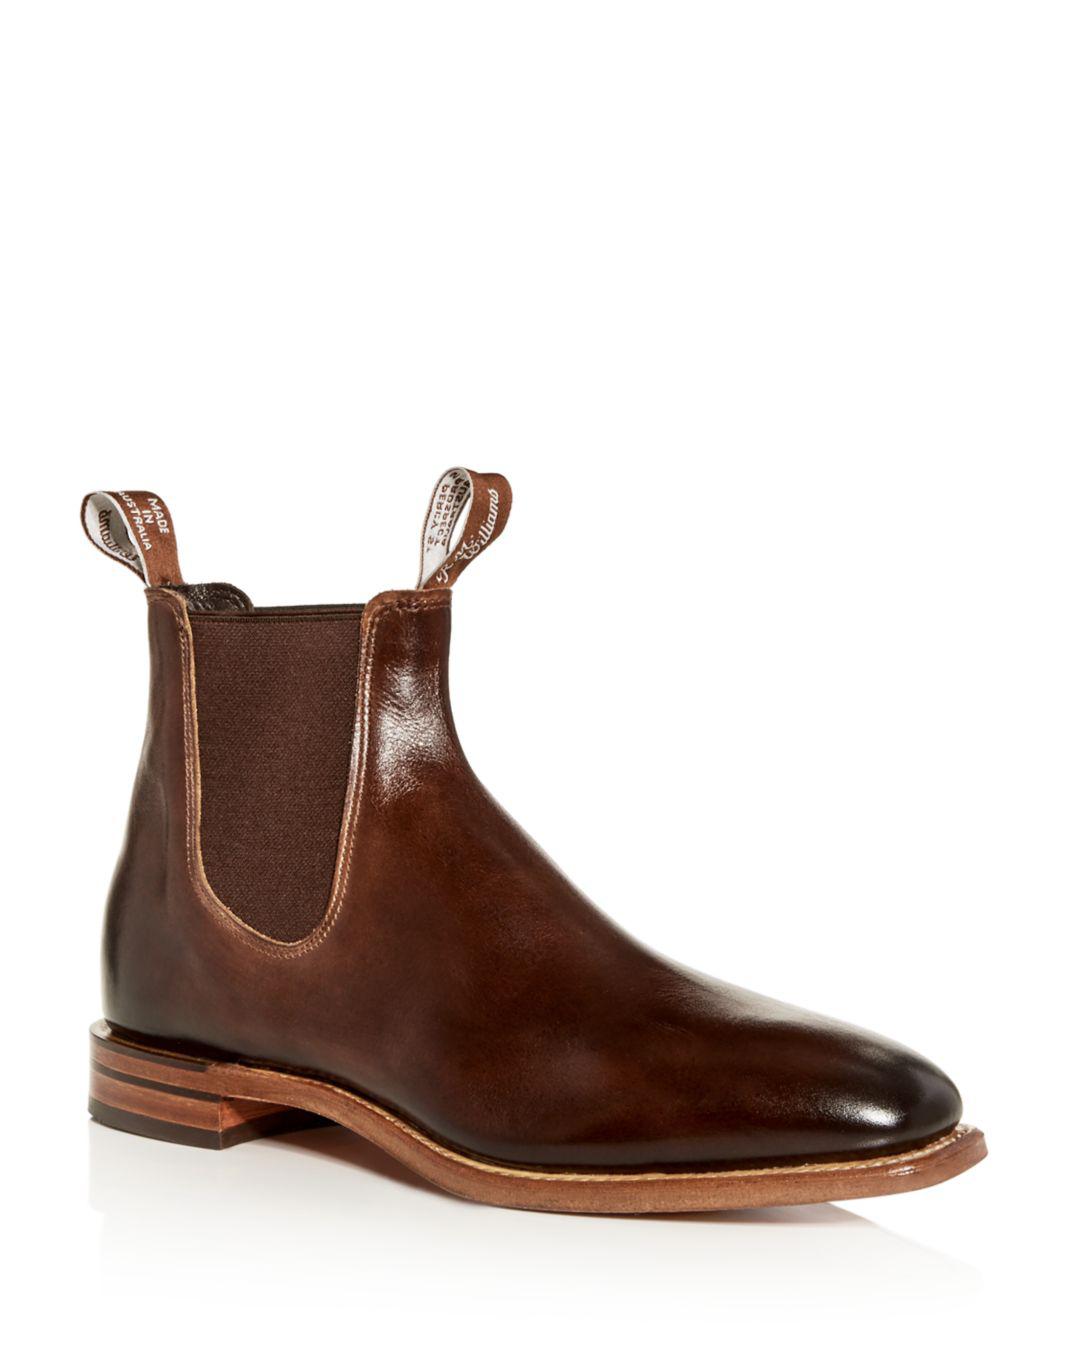 Lyst - R.M. Williams Men's Chinchilla Leather Chelsea Boots in Brown ...